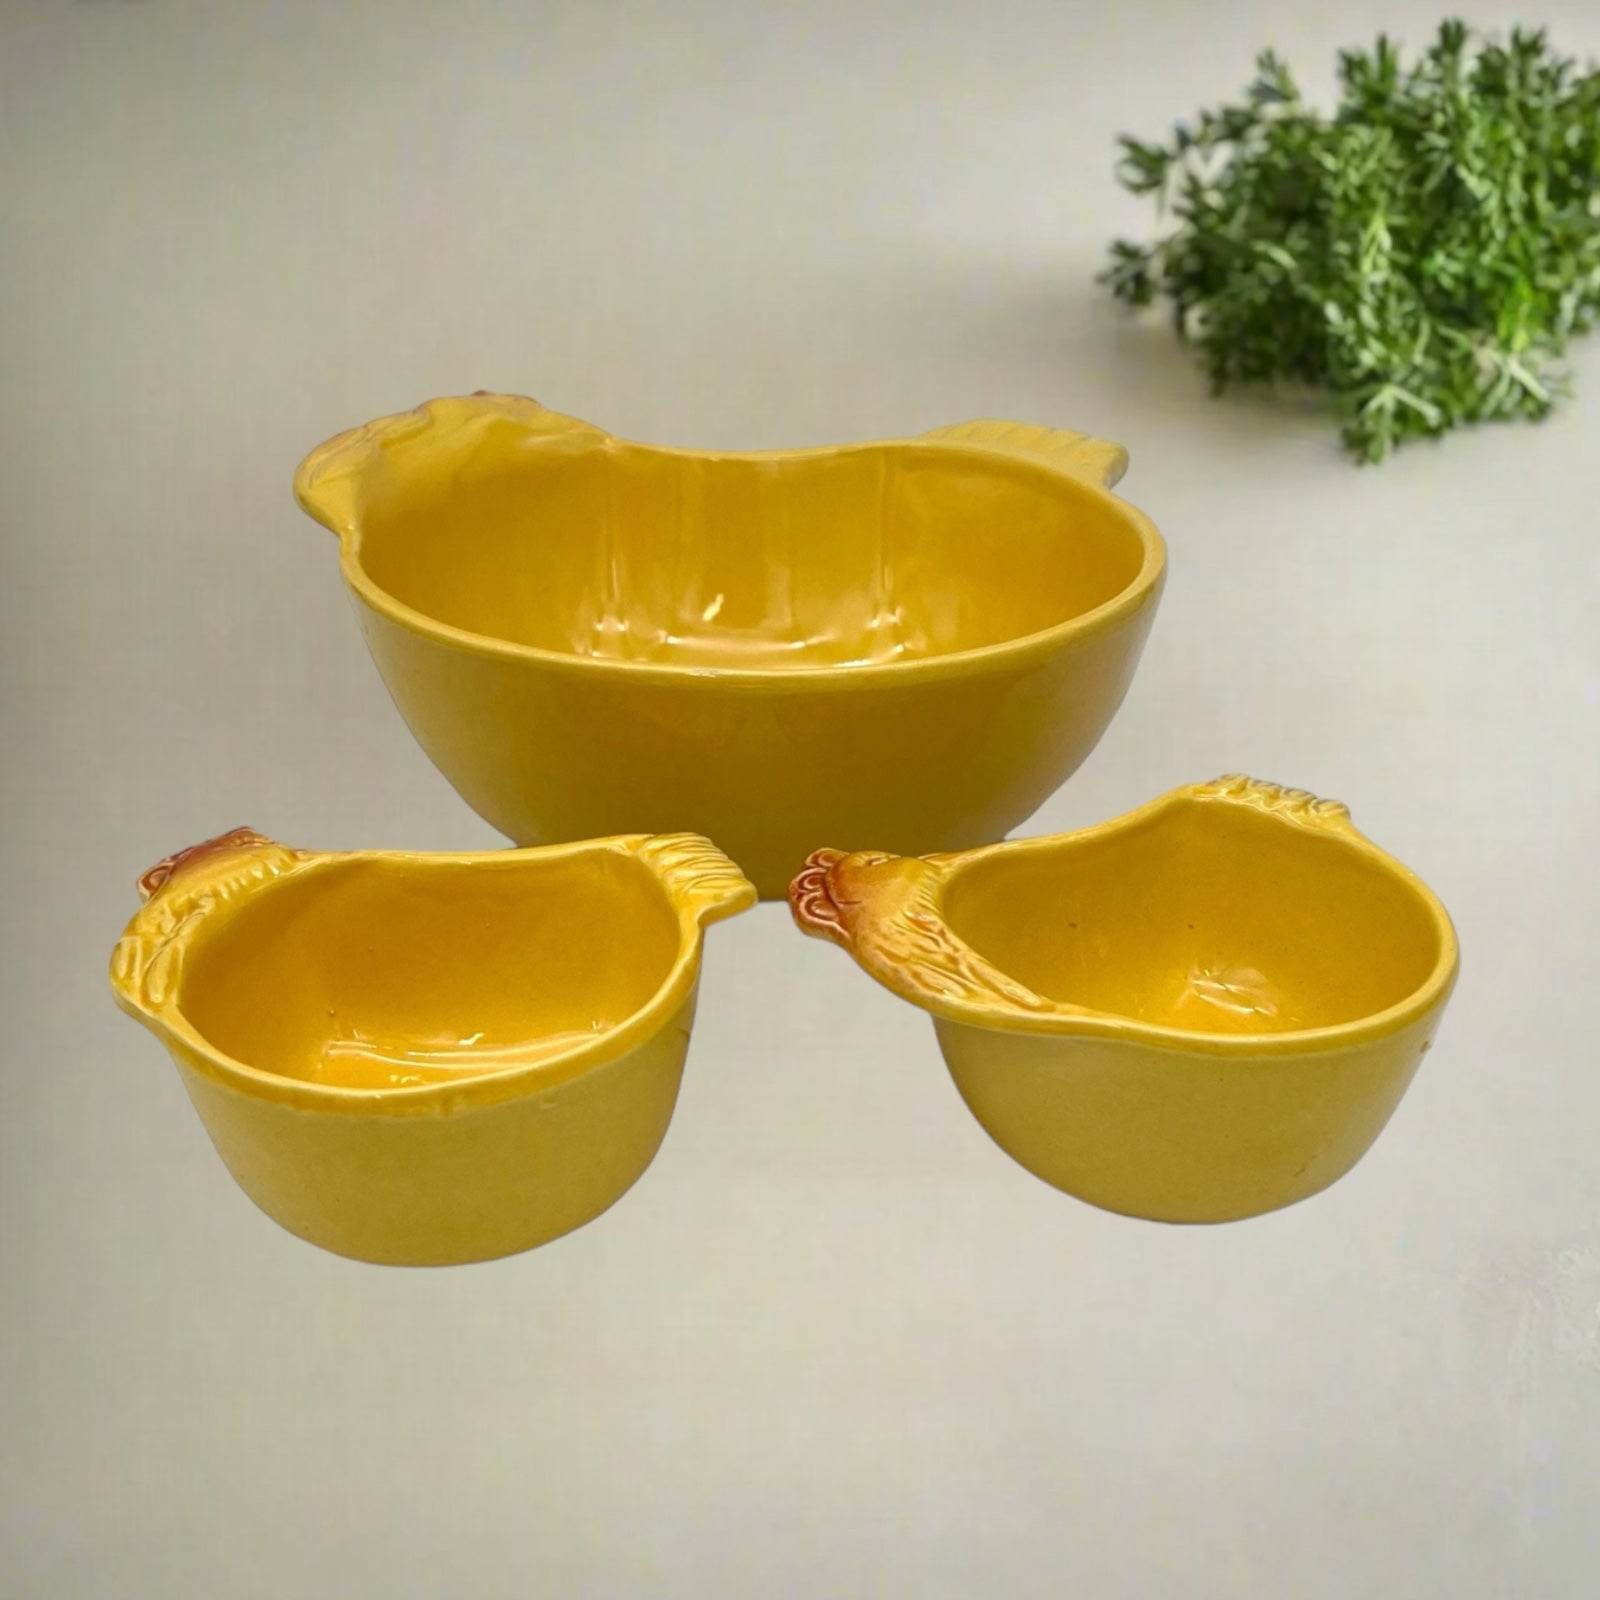  set of 3 matching chicken salad bowls plates sold by All Things French Store